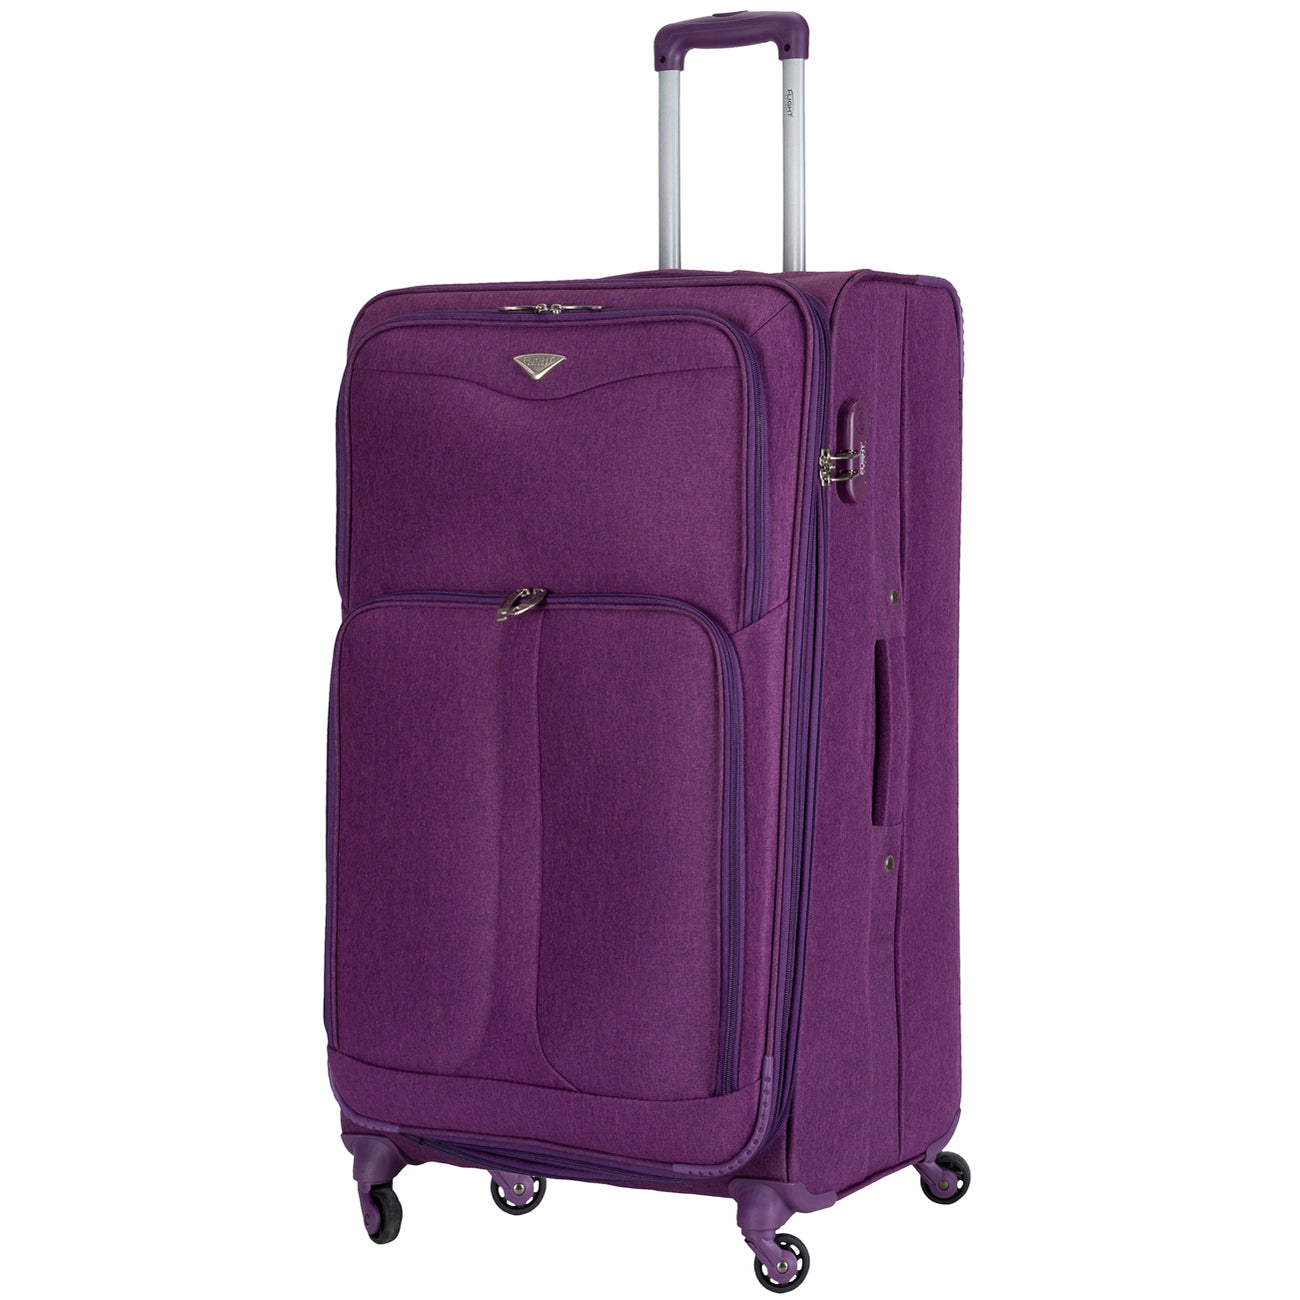 Soft Case Luggage Sets — Home Outdoor & More